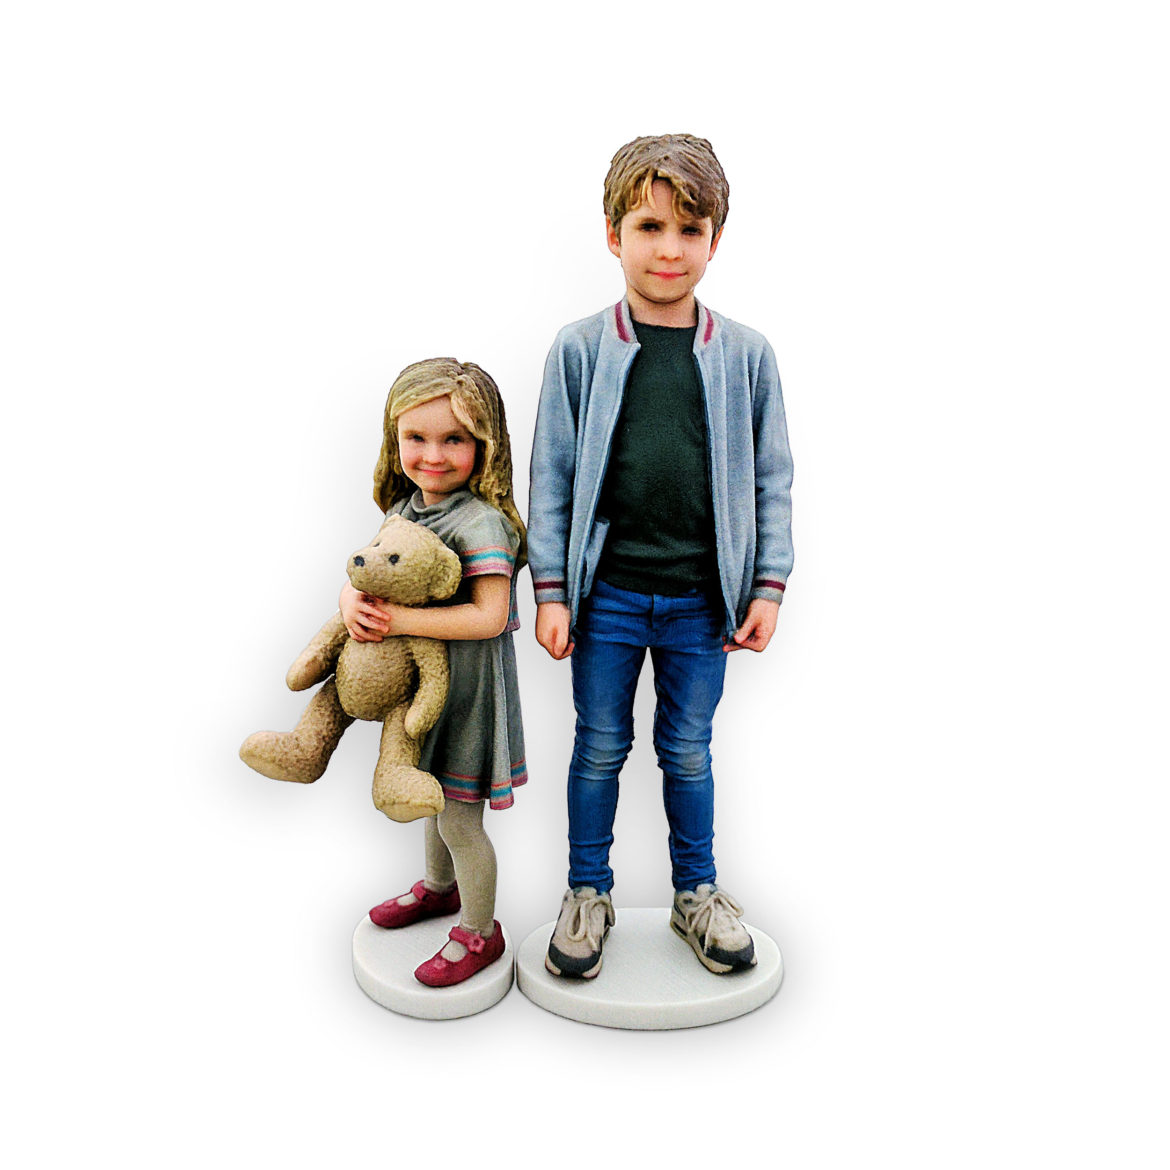 3D Printed Family Figurines | Bespoke Snapshot Of Your Family